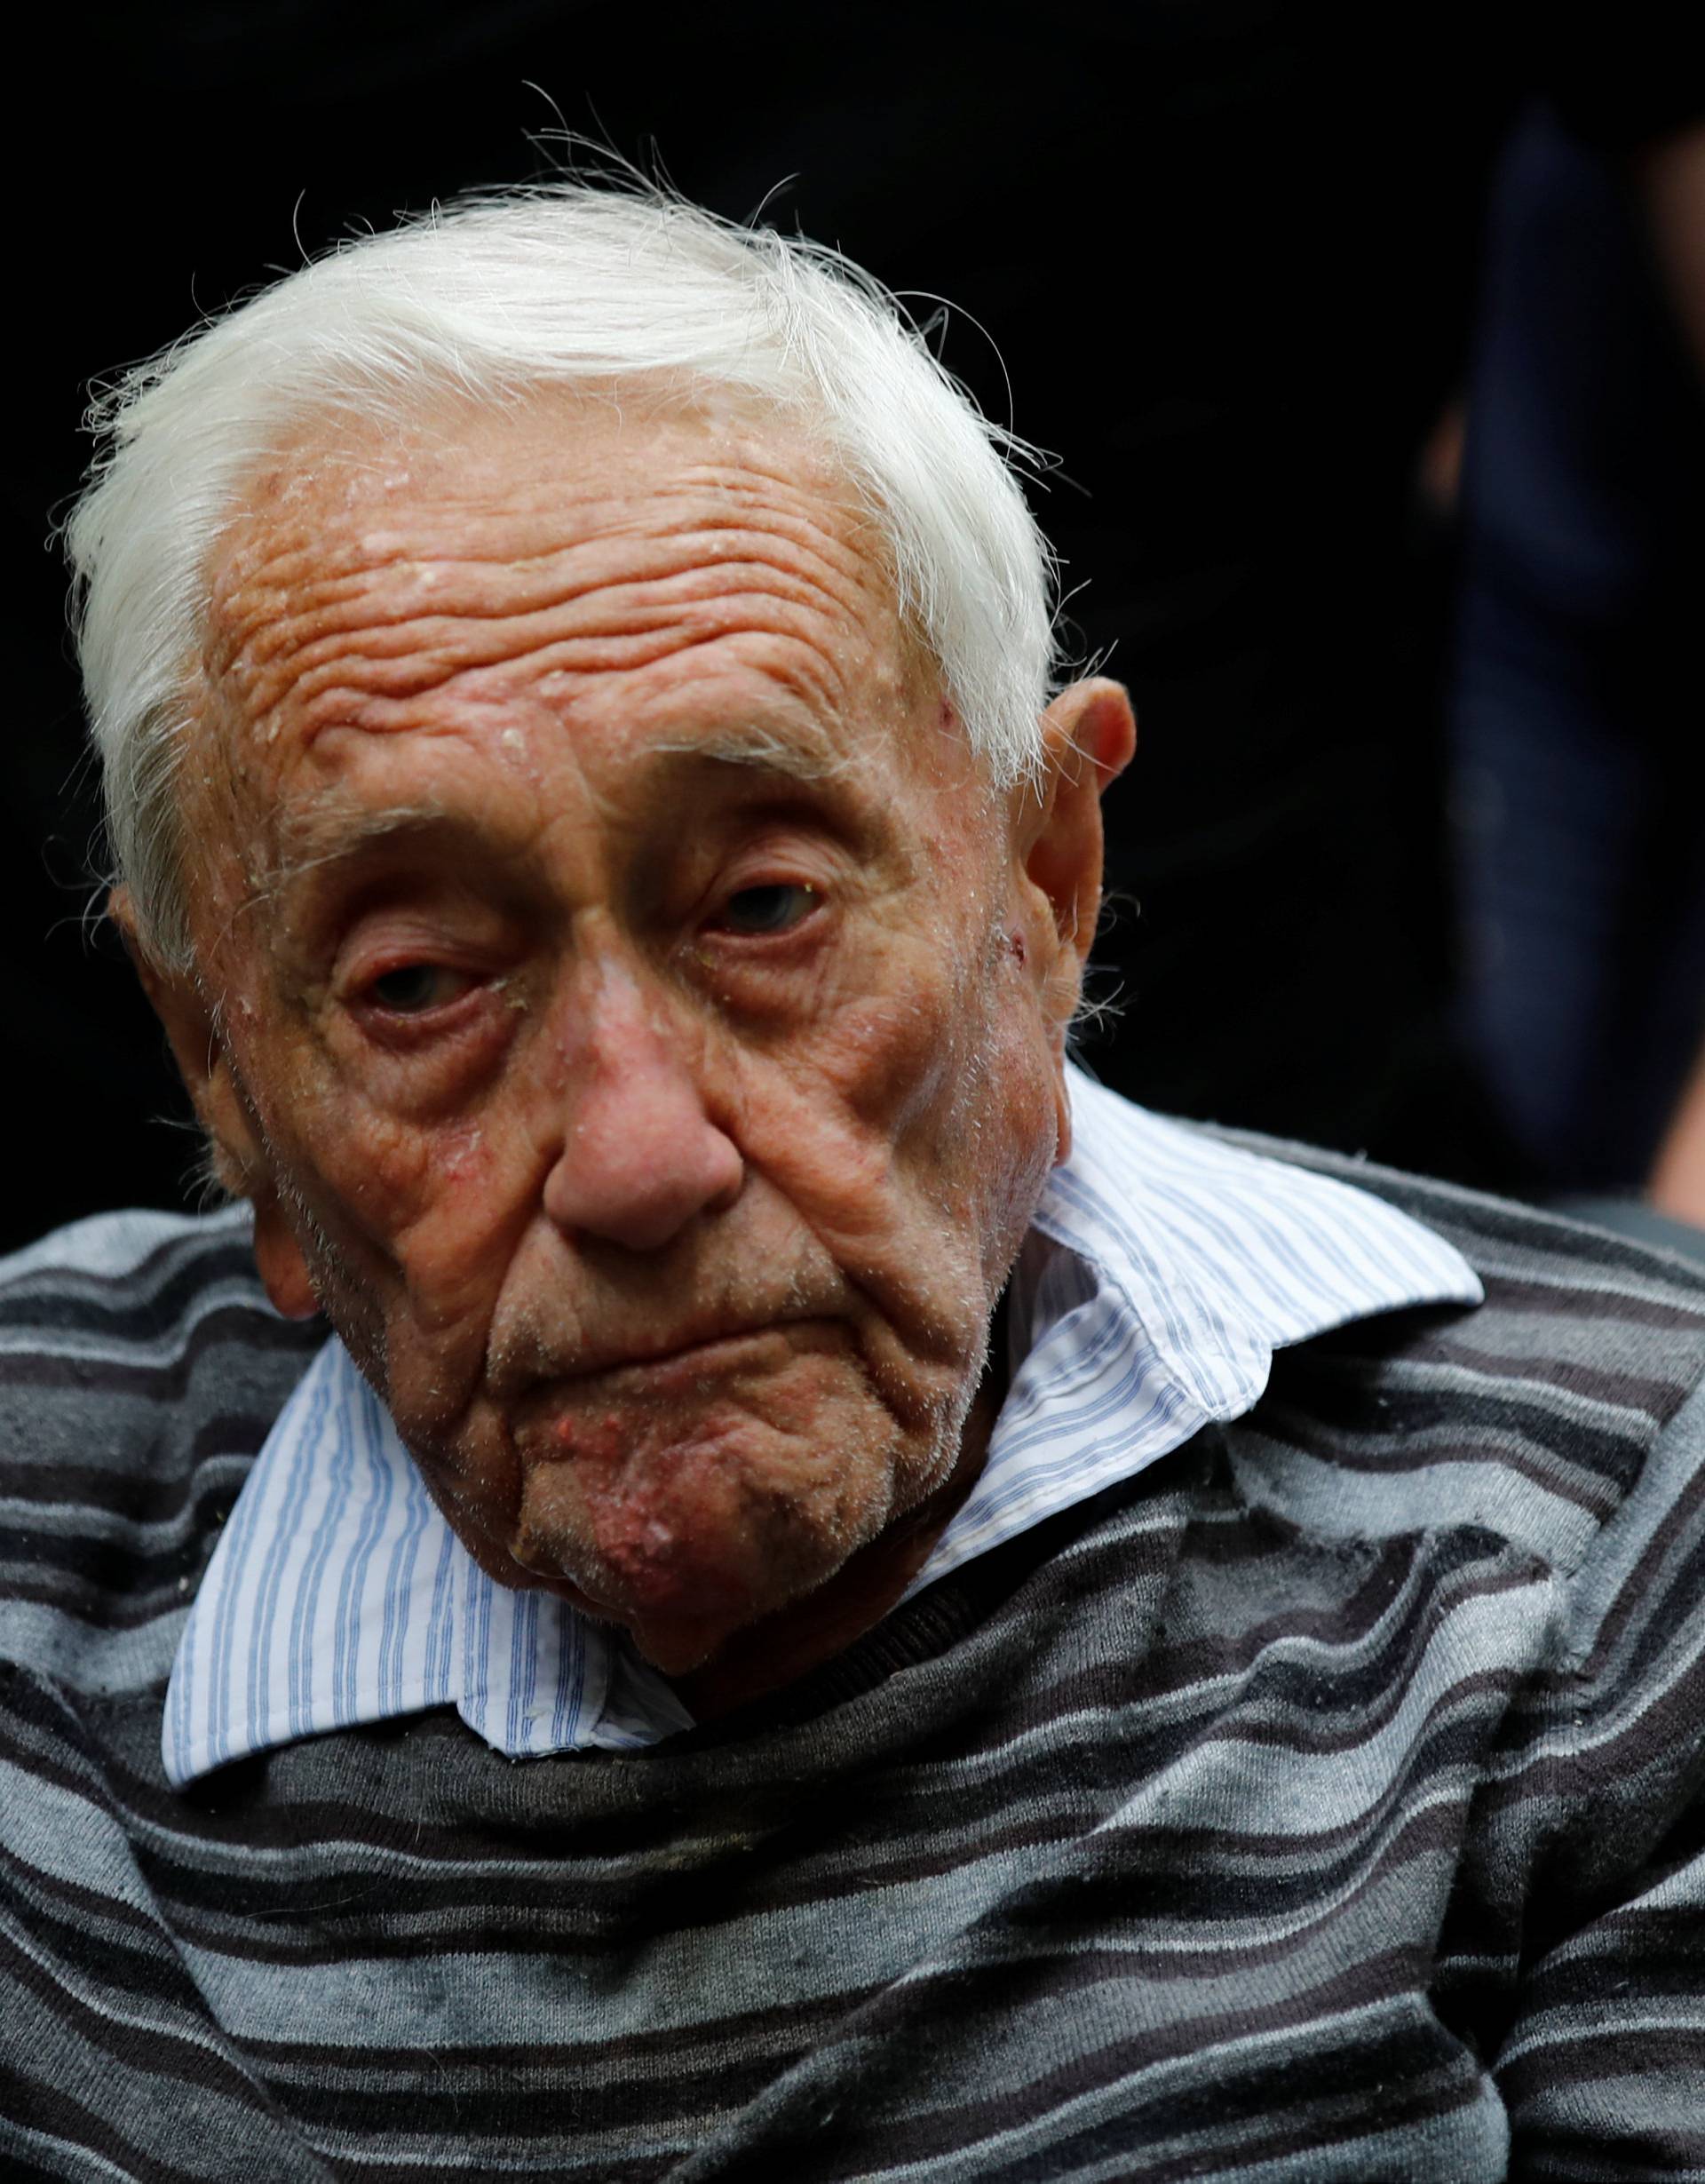 David Goodall, 104, arrives to hold a news conference a day before he intends to take his own life in assisted suicide, in Basel